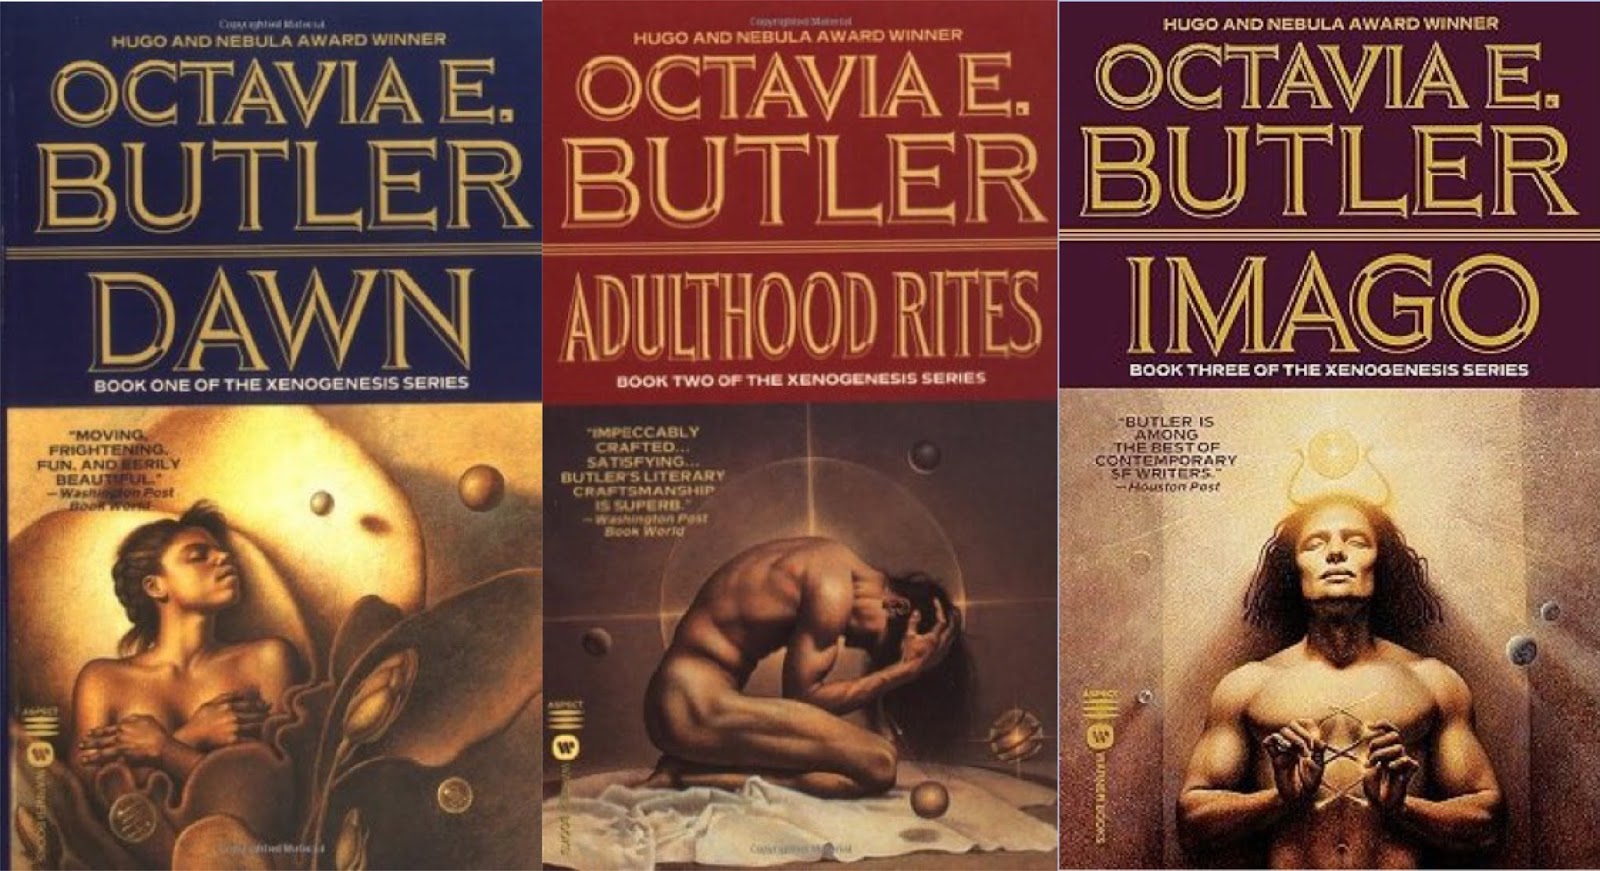 The three novels in Octavia Butler's Xenogenesis series are being adapted by director Ava DuVernay (<em>A Wrinkle in Time</em> and <em>Selma</em>).